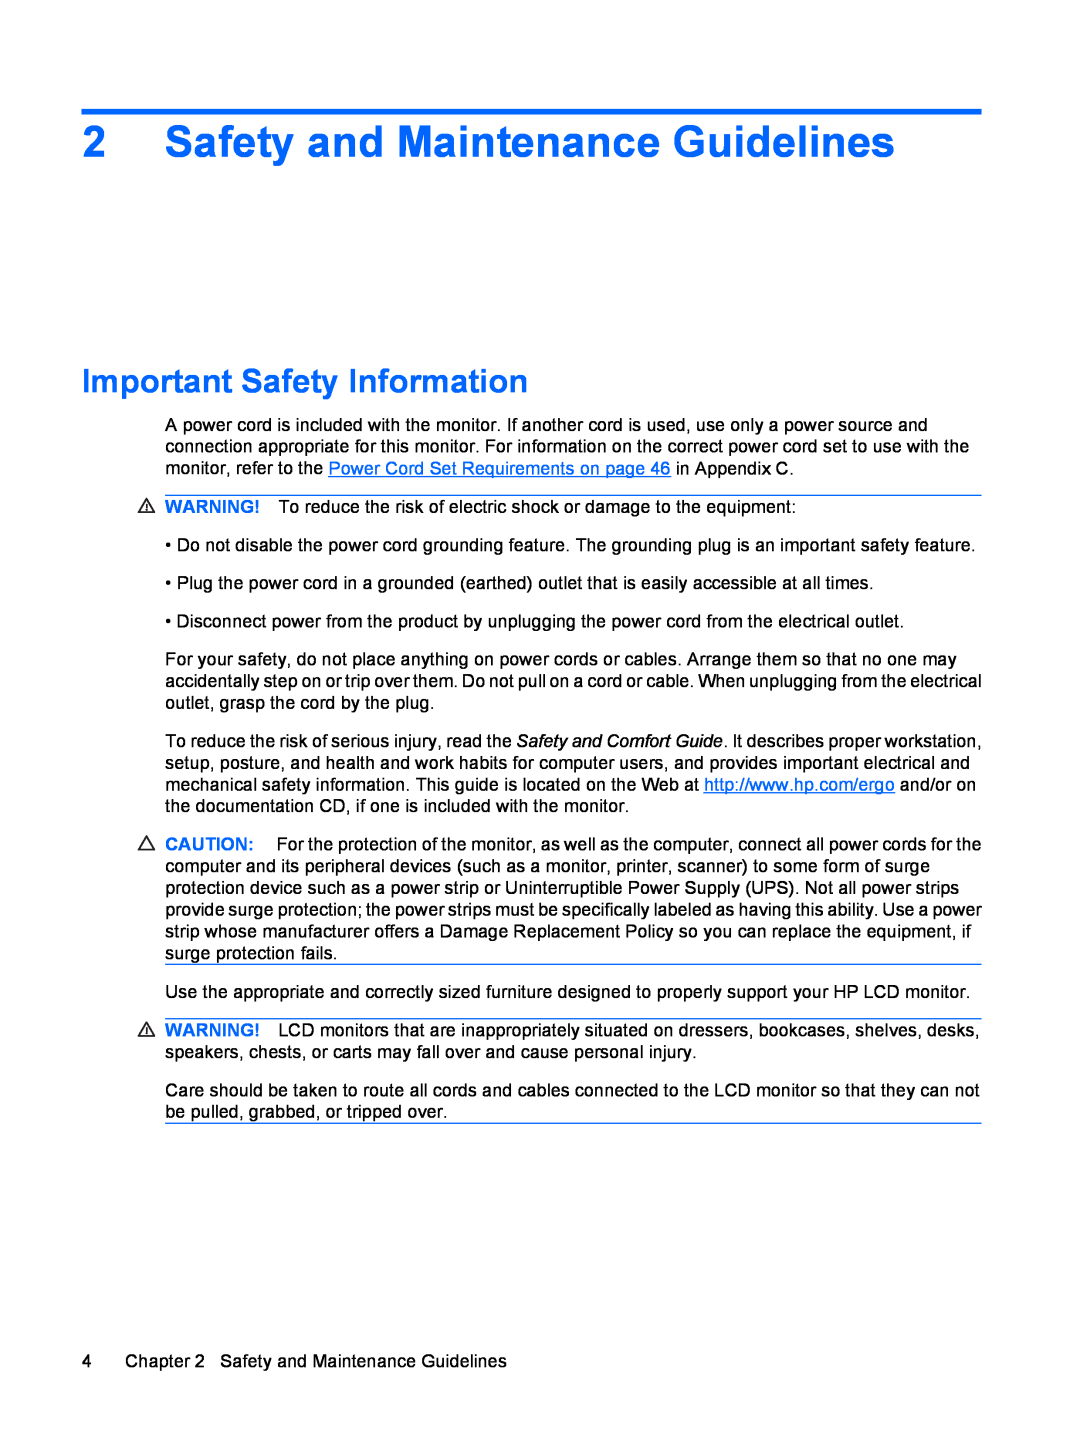 HP LP2275w manual Safety and Maintenance Guidelines, Important Safety Information 